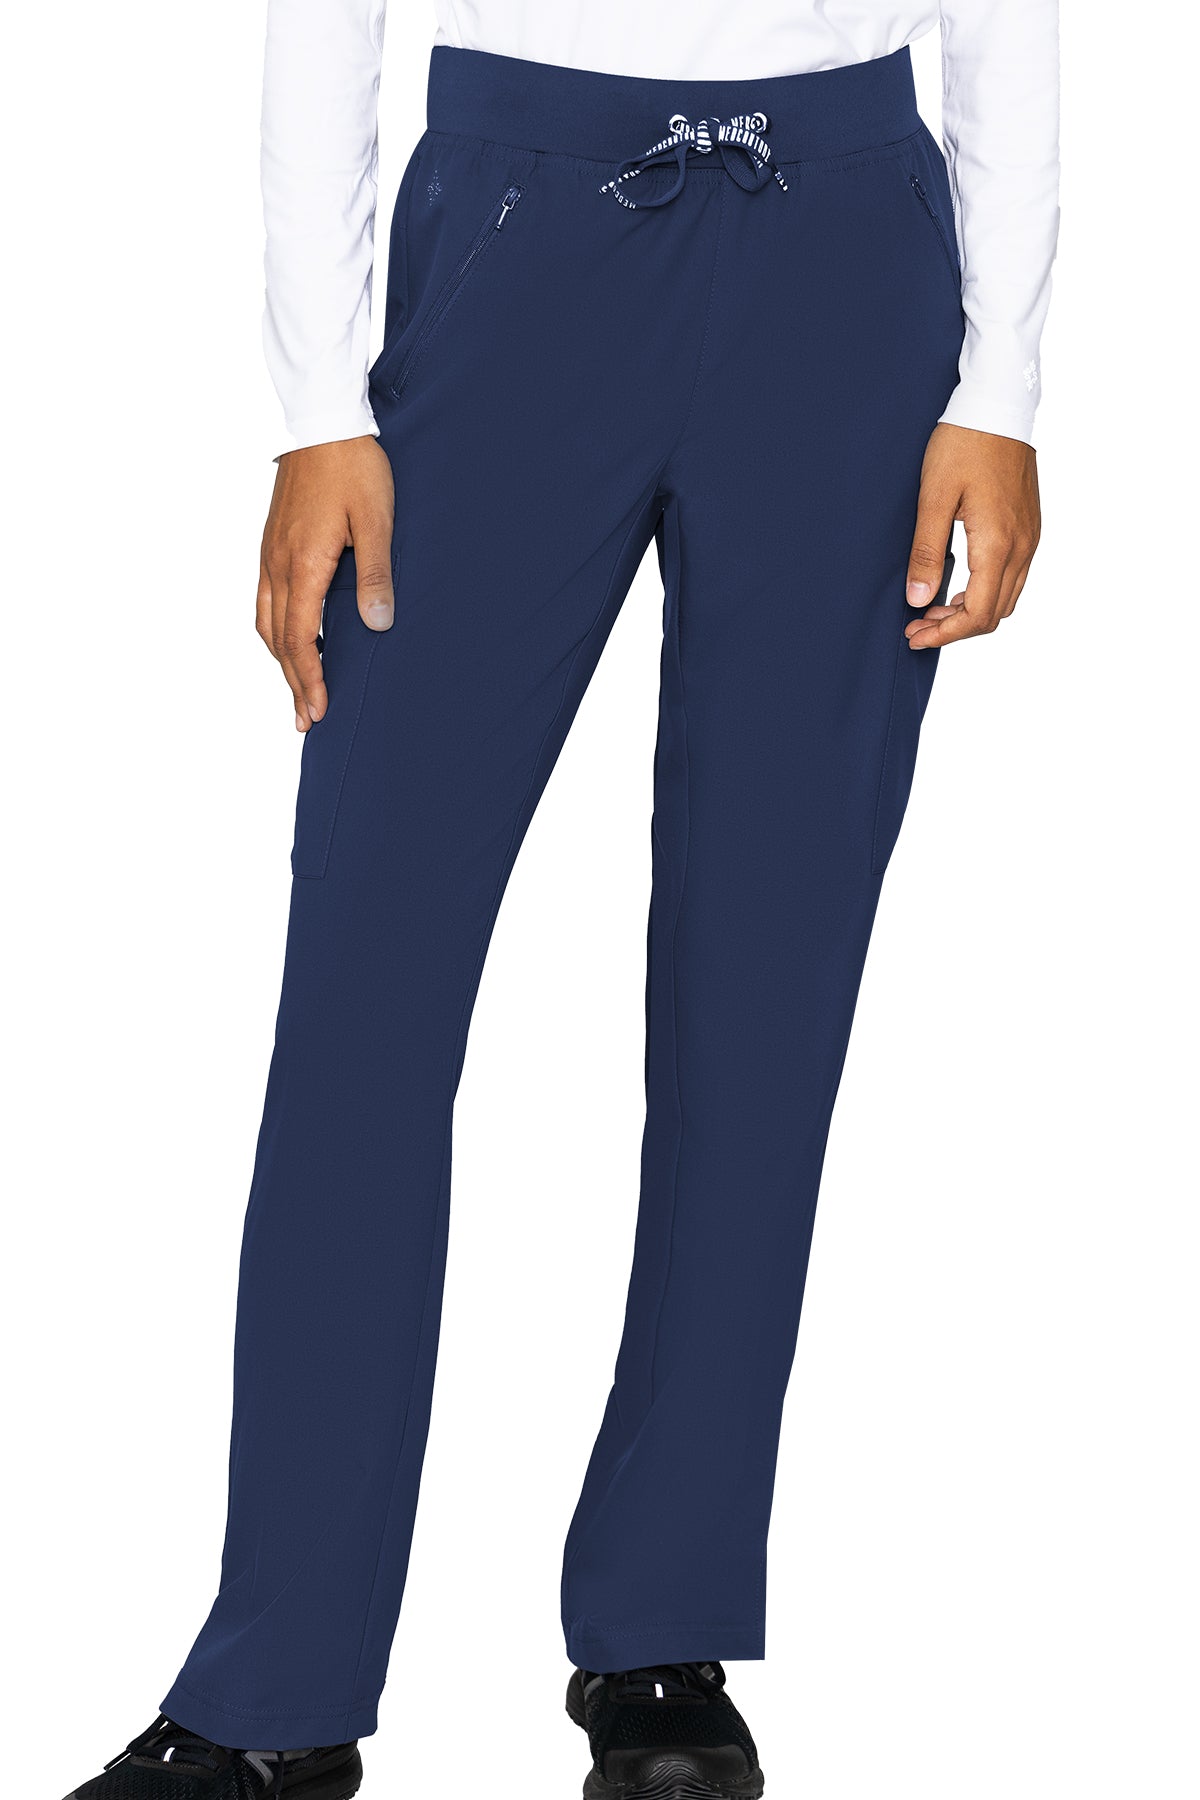 Med Couture Scrub Pants Insight Zipper Pocket Pant in Navy at Parker's Clothing and Shoes